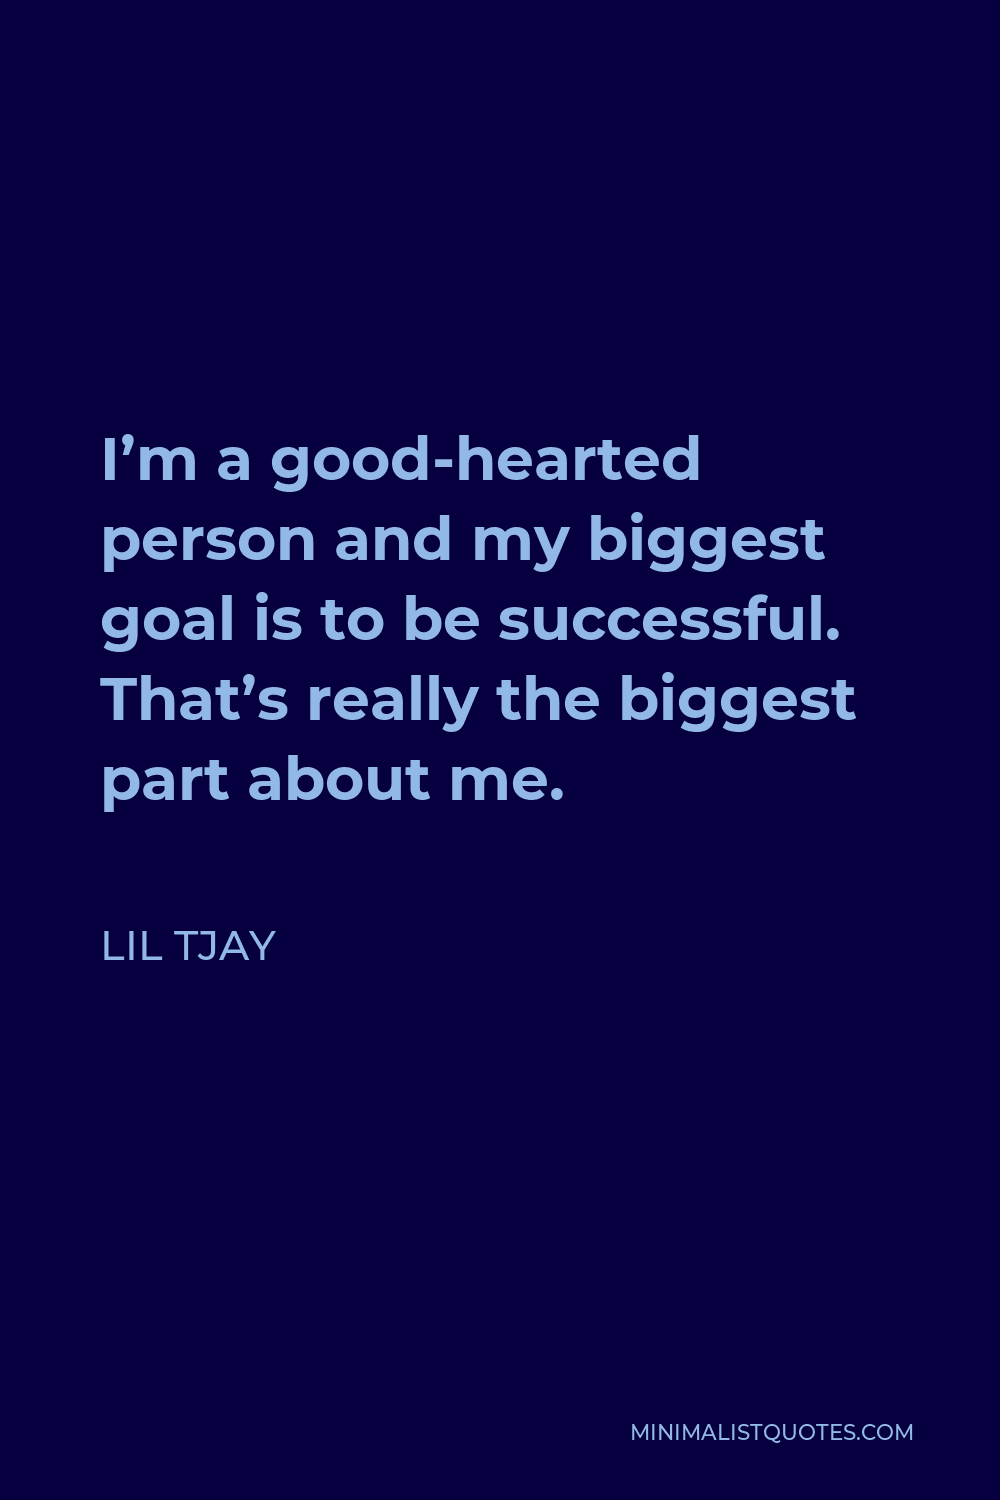 Lil Tjay Quote - I’m a good-hearted person and my biggest goal is to be successful. That’s really the biggest part about me.